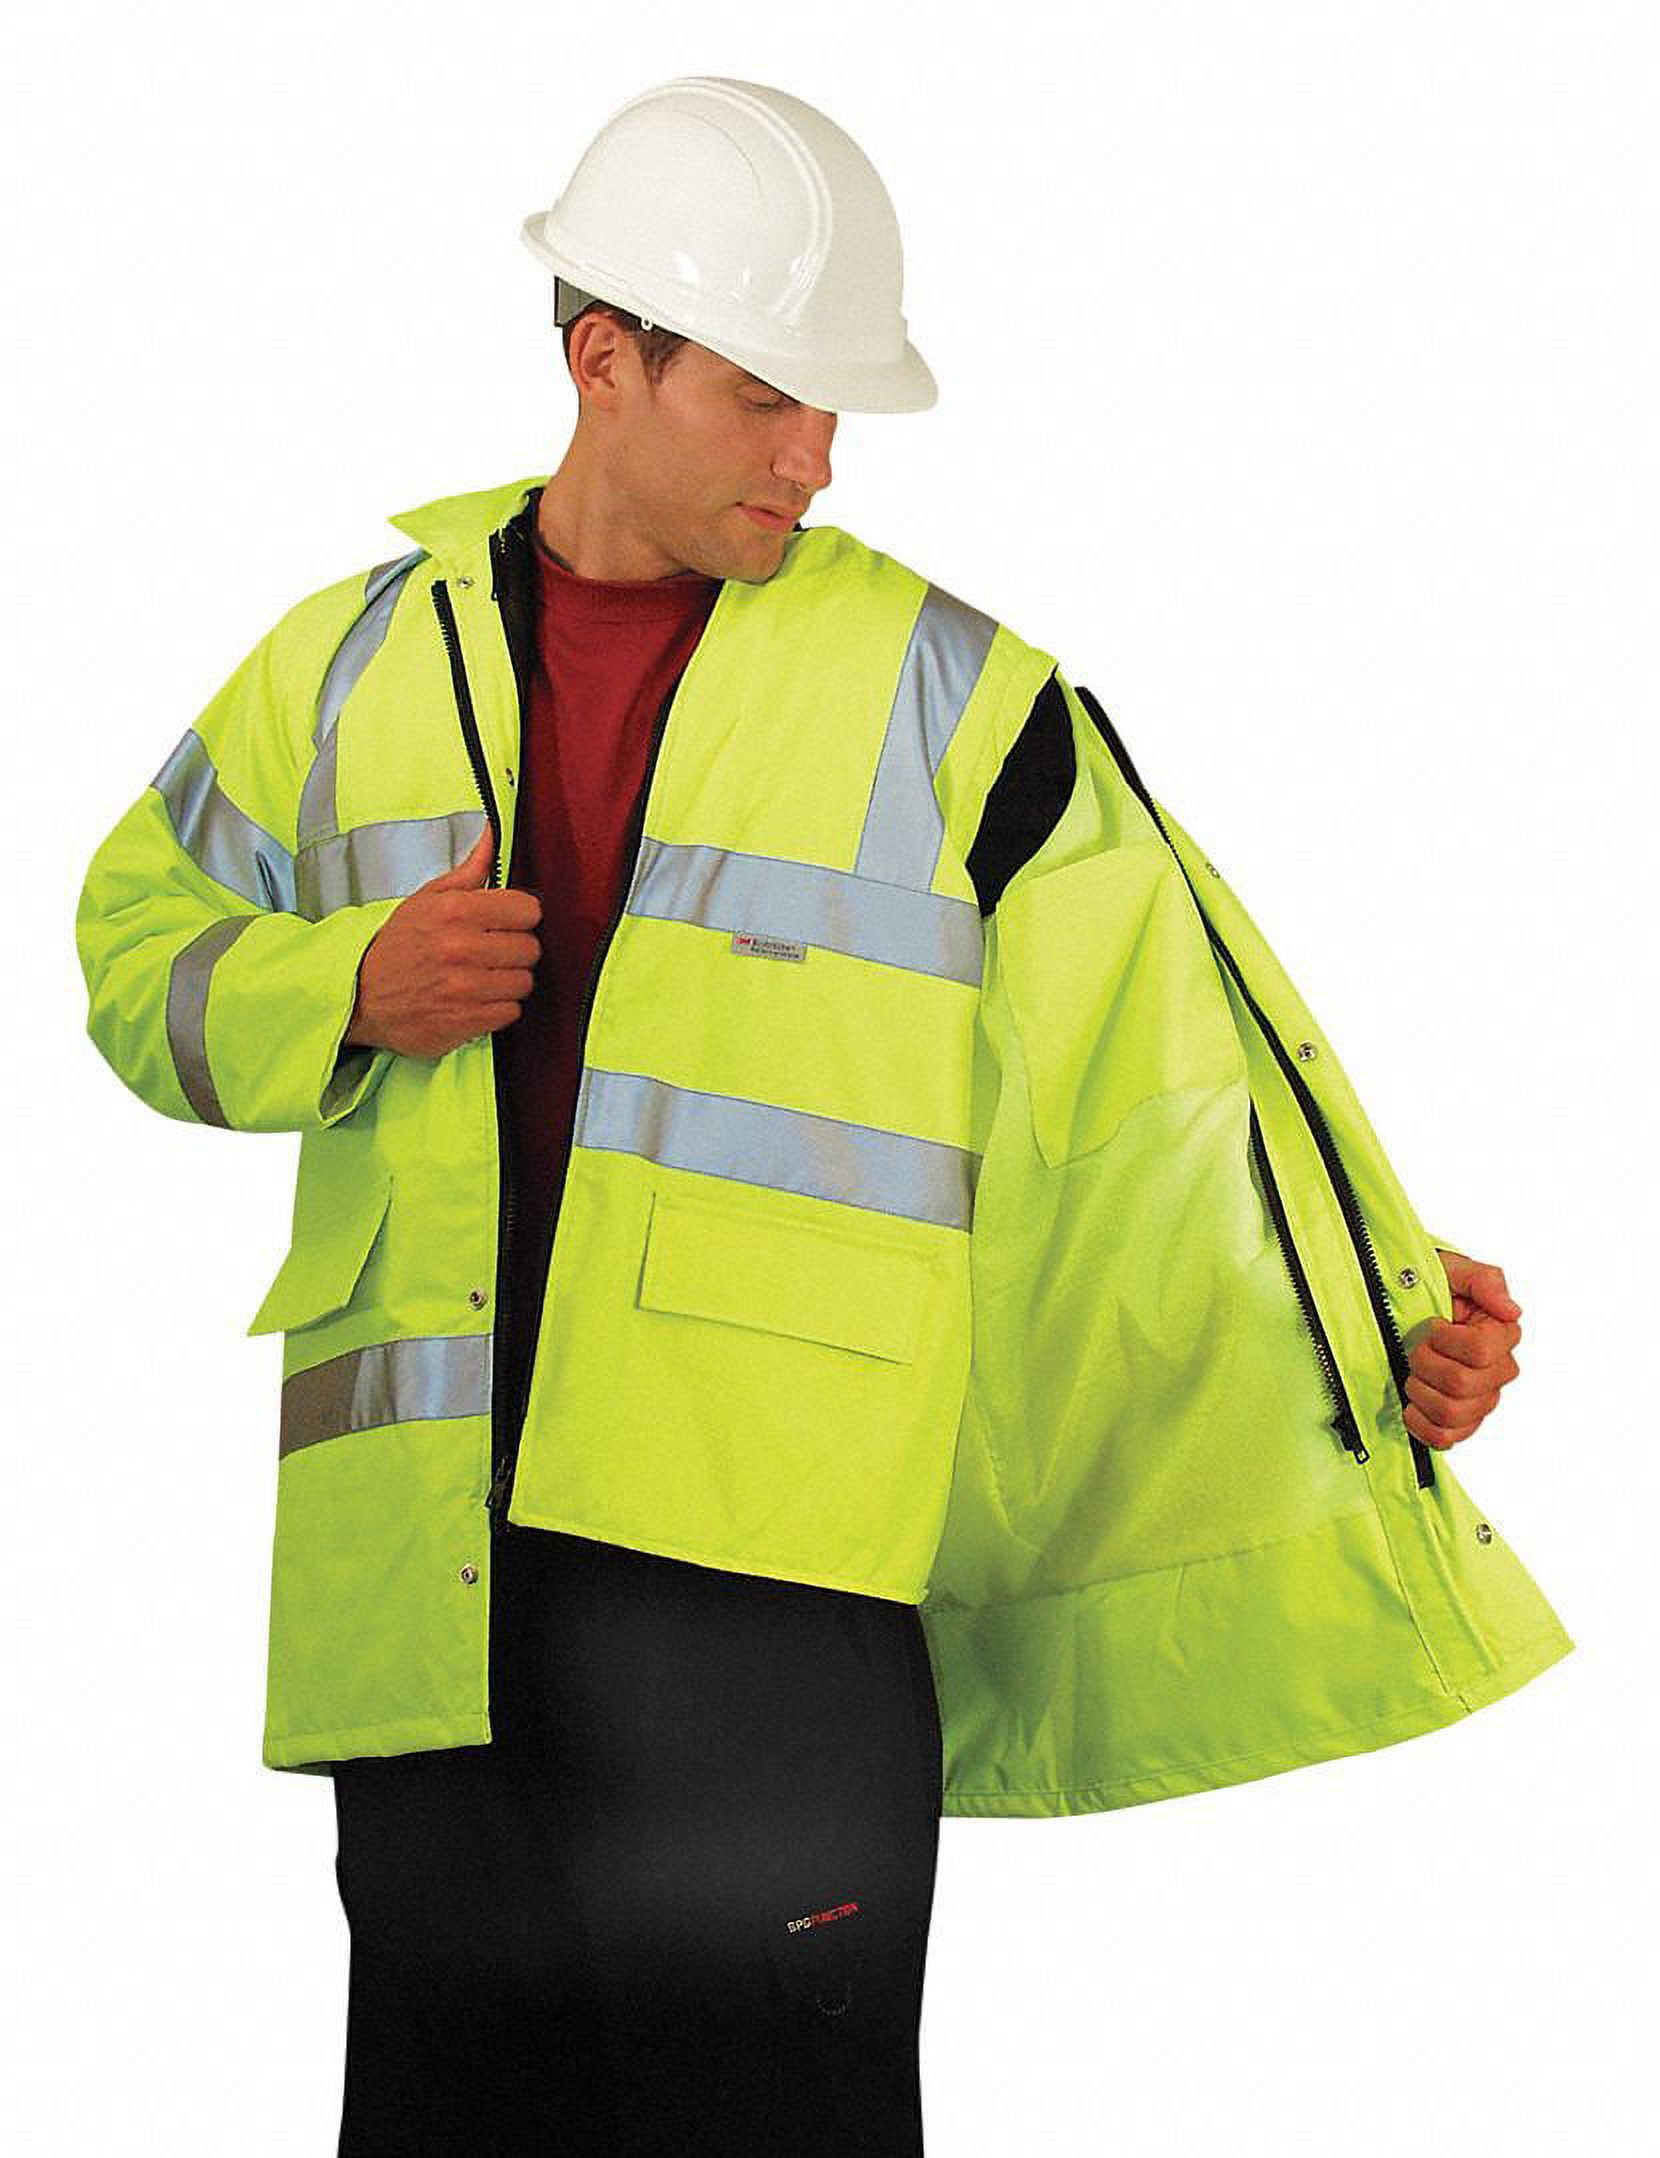 Personal Protective Equipments For Sale On A Shop Harness Reflective Vests  Yellow Jackets Construction Site Helmets As Well As Various Other Ppe  Devices Stock Photo - Download Image Now - iStock